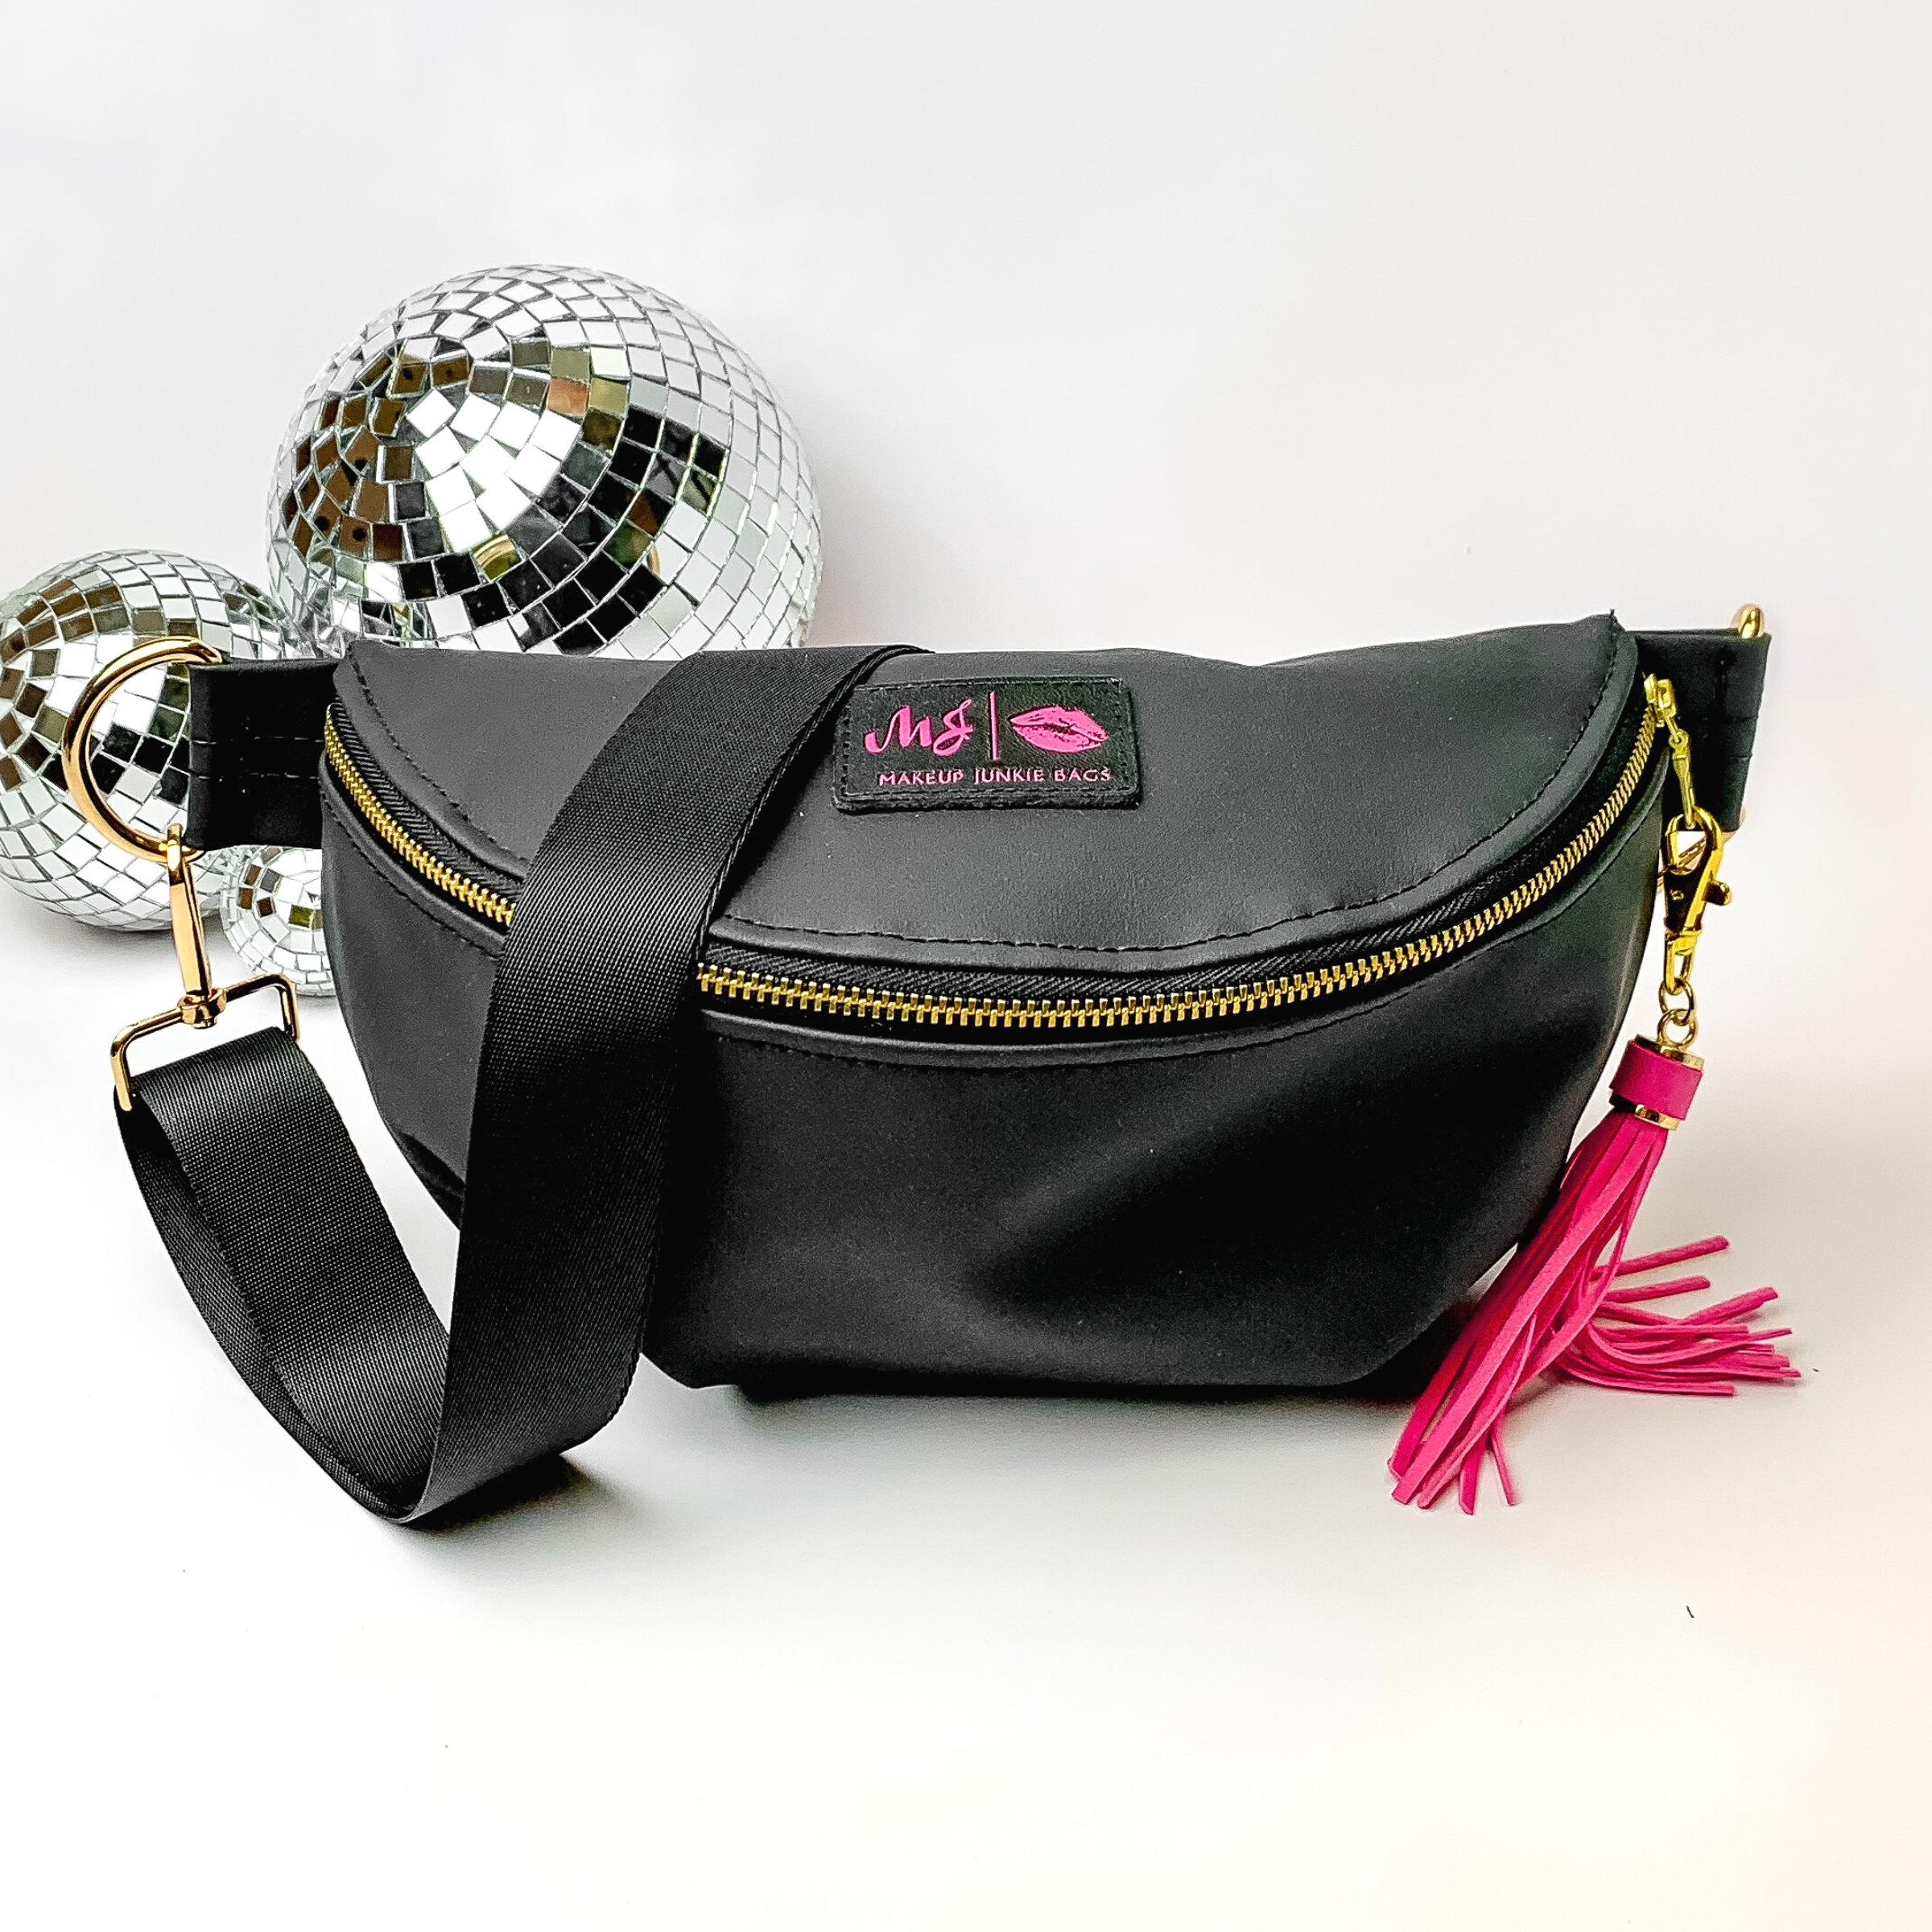 Black fanny pack with a black strap. This bag includes gold accents, a gold zipper, and a hot pink tassel. This bag also has a pink stitched logo for Makeup Junkie. This fanny pack is pictured on a white background in front of disco balls. 